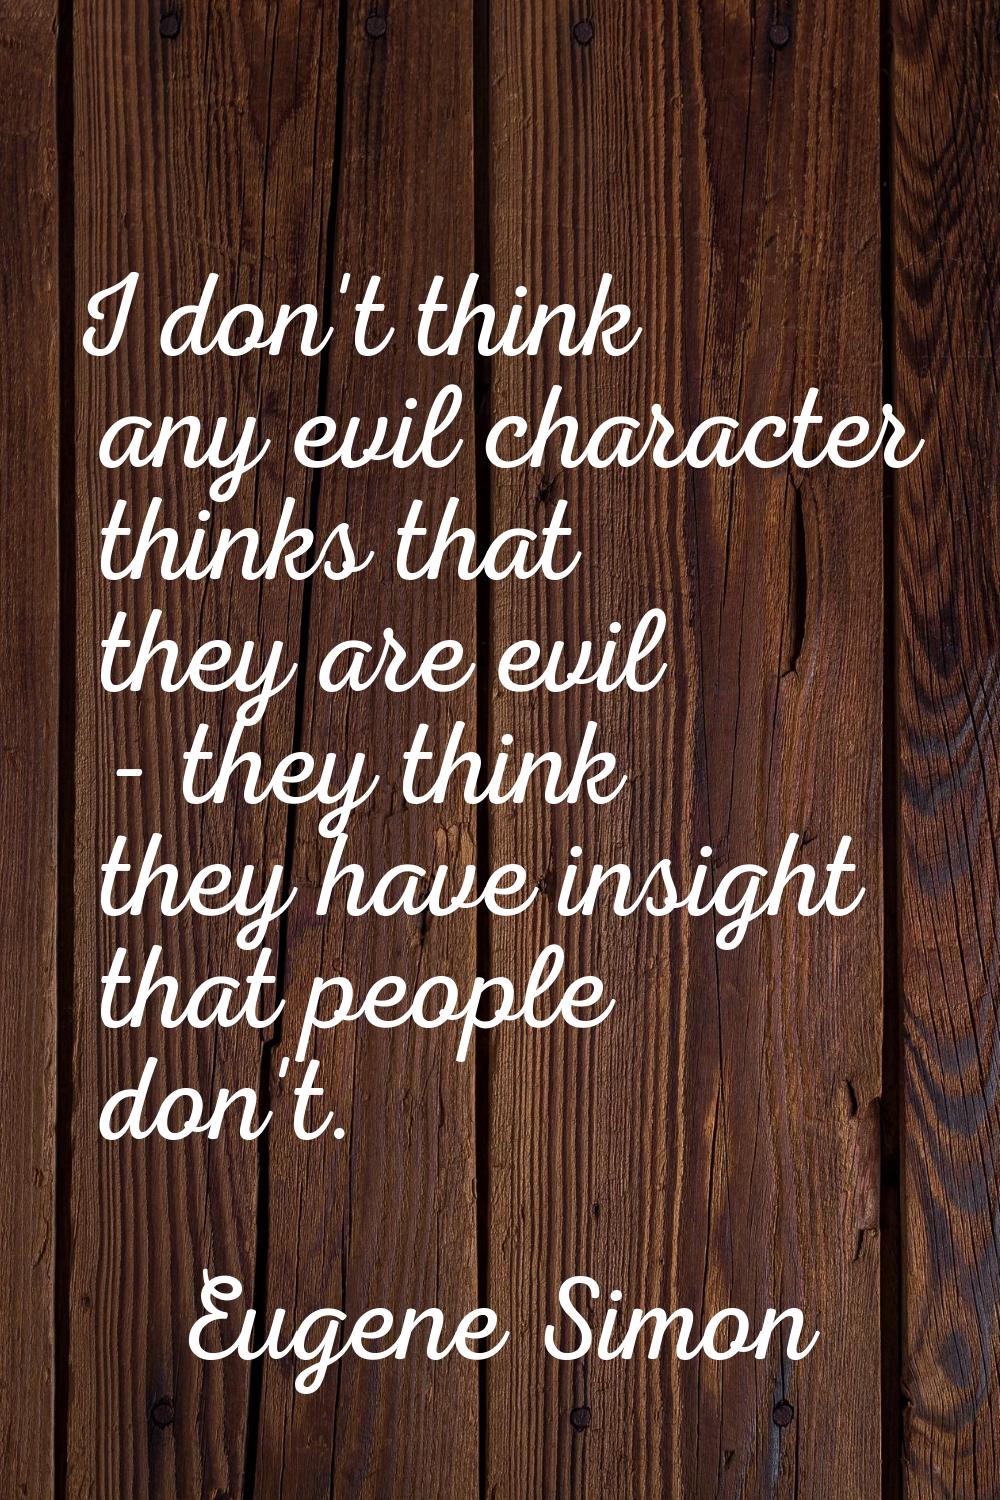 I don't think any evil character thinks that they are evil - they think they have insight that peop